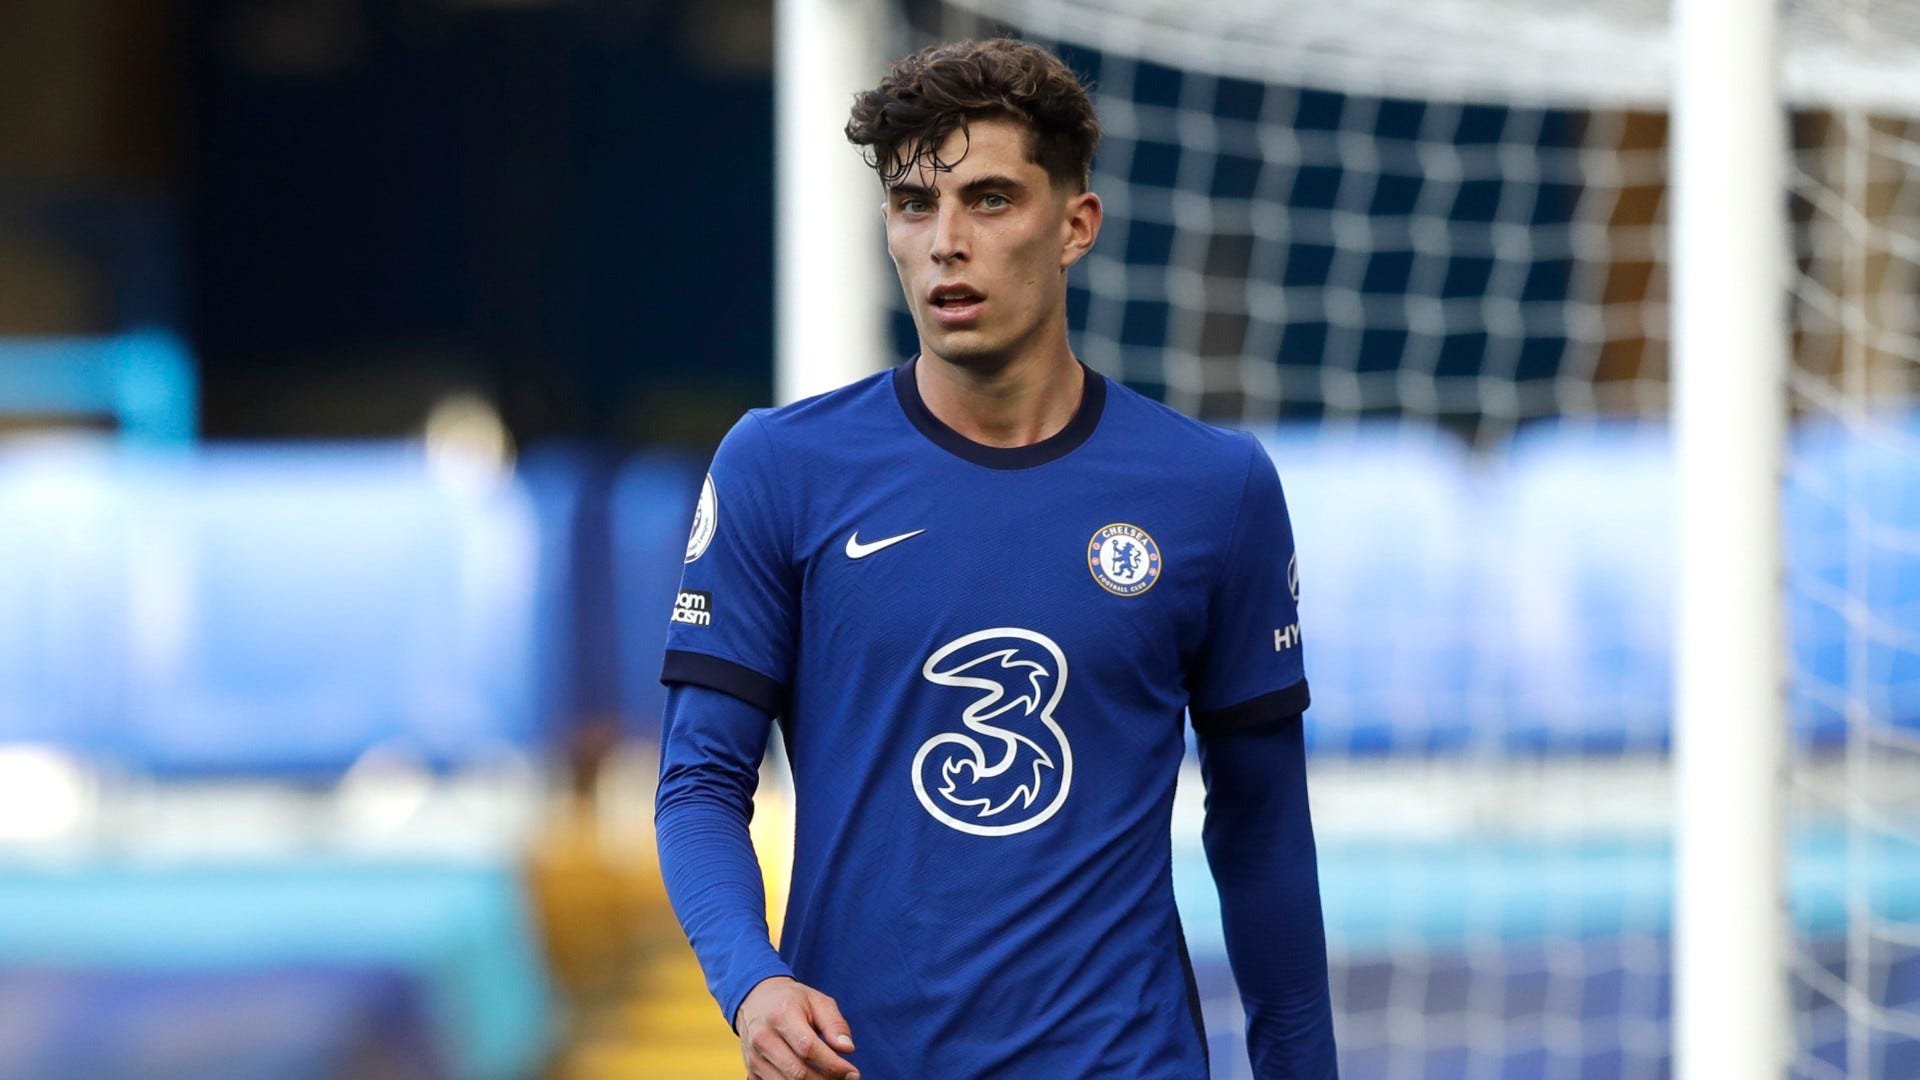 Chelsea warned Havertz 'doesn't feel comfortable' as false nine but former Germany striker Fischer expects £70m star to shine | Goal.com Singapore